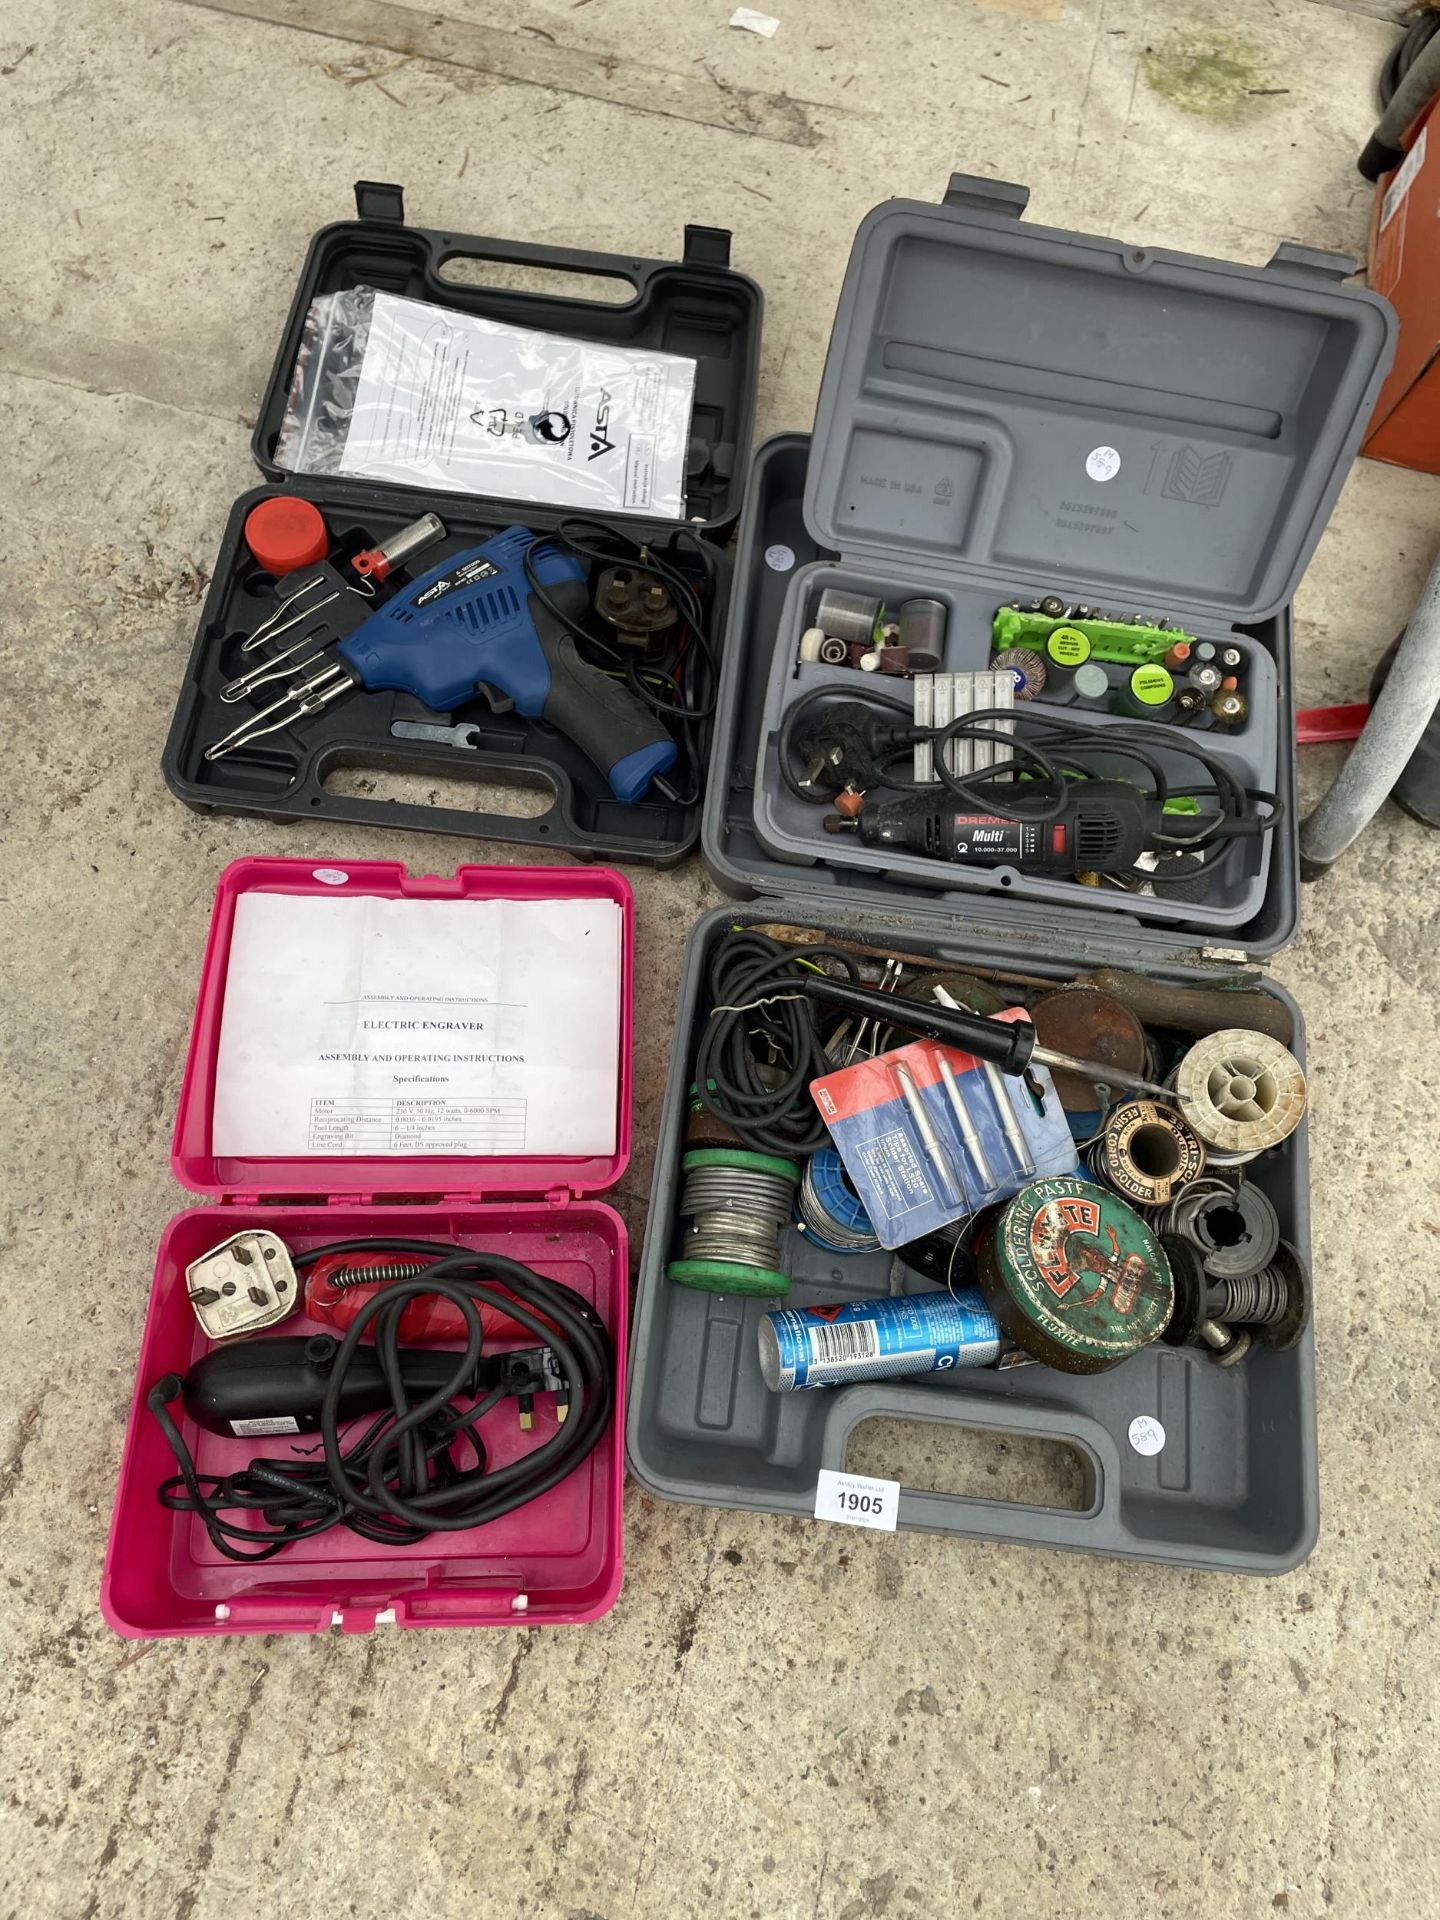 AN ASSORTMENT OF TOOLS TO INCLUDE SOLDERING IRONS, WIRE AND A DREMEL MULTI TOOL ETC